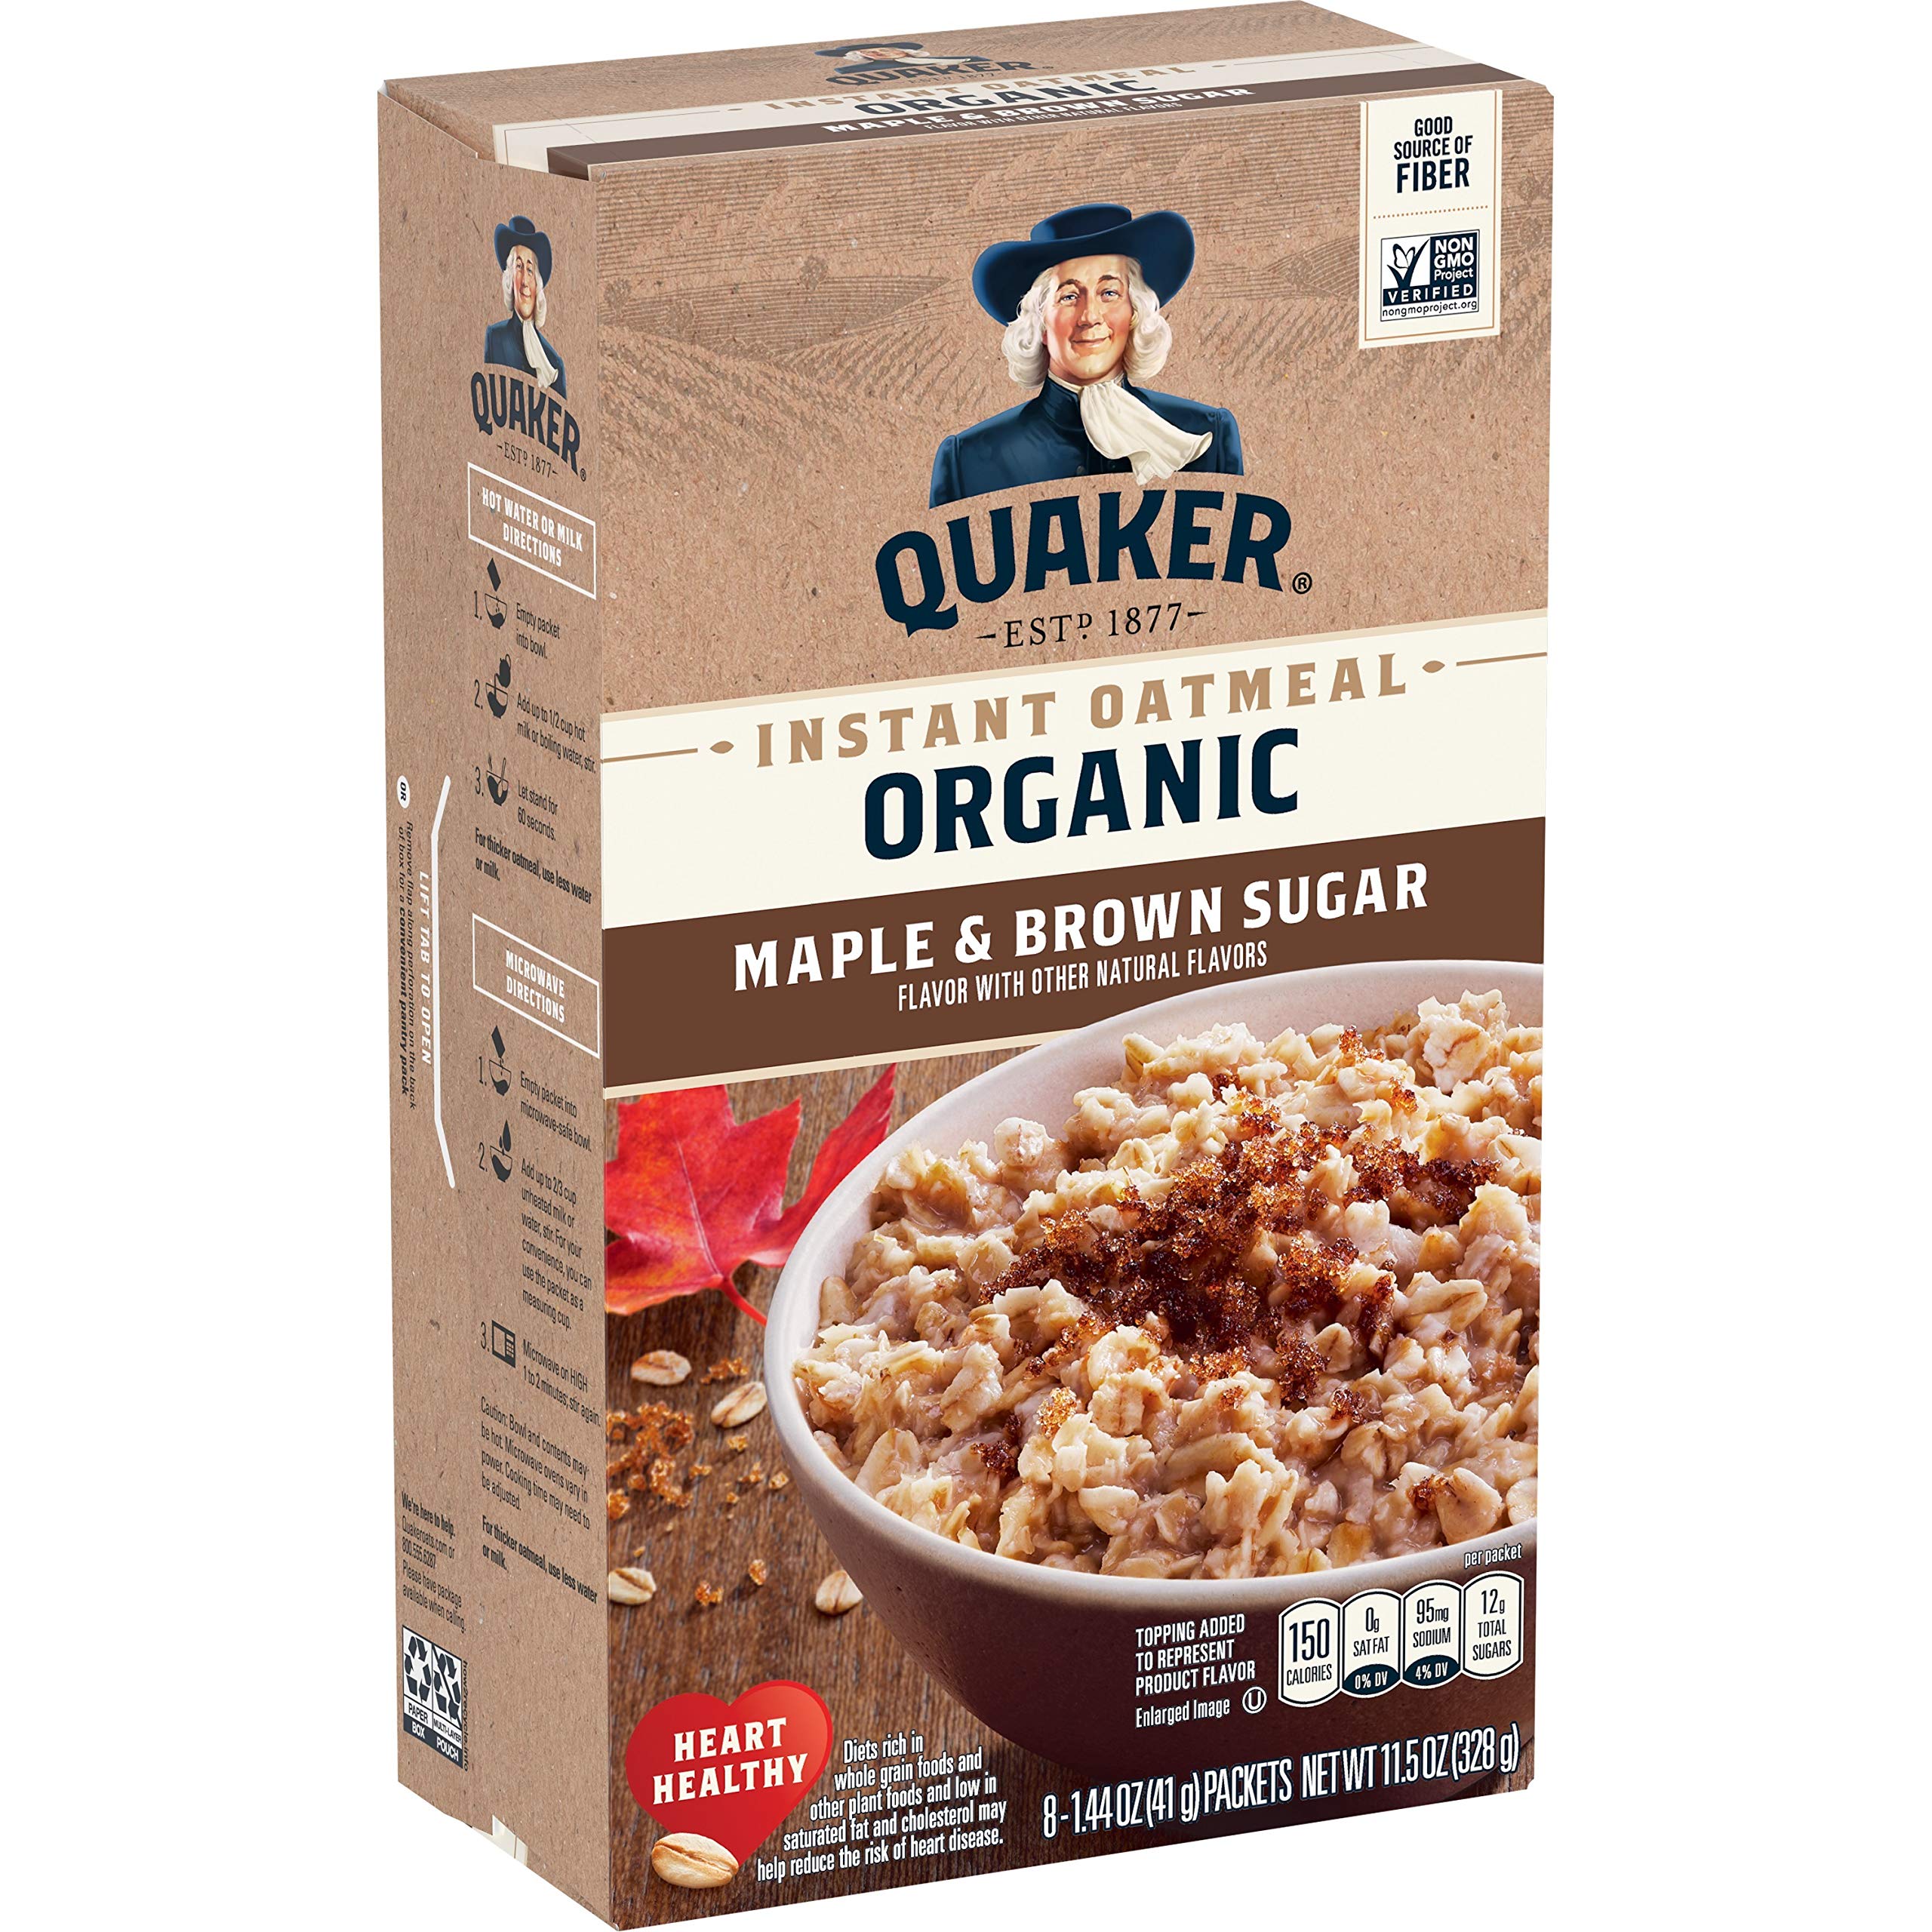 8-Pack 1.44-Oz Quaker Organic Instant Oatmeal Breakfast Cereal (Maple & Brown Sugar) $3.33 w/ S&S + Free Shipping w/ Prime or on $35+